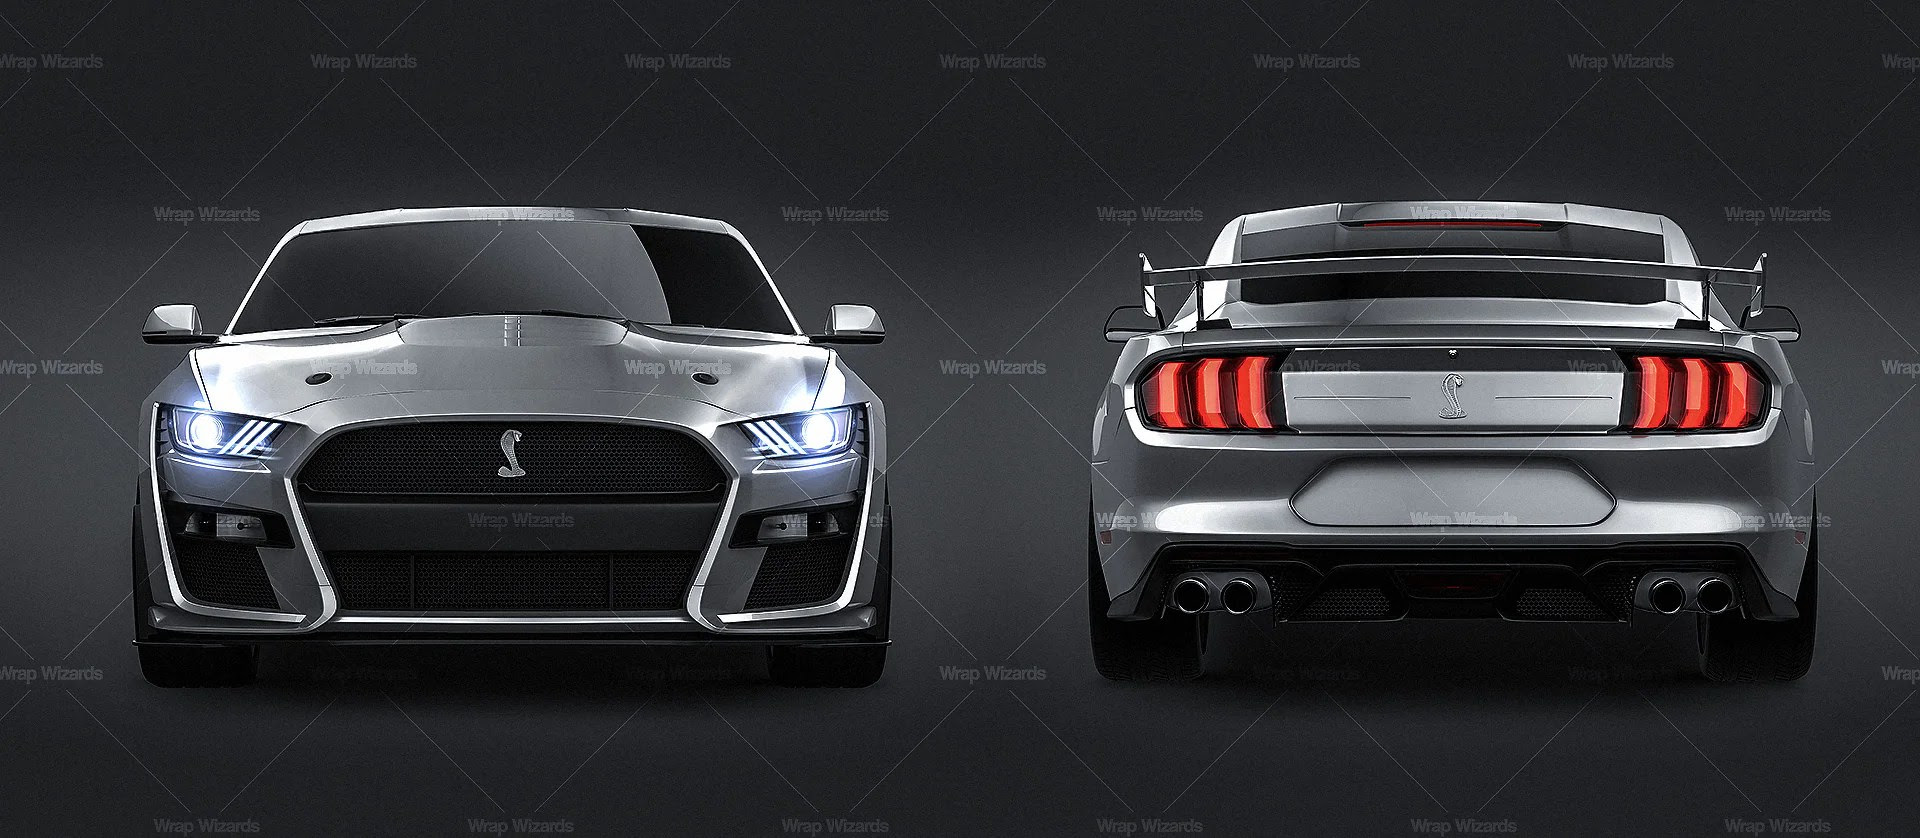 Ford Mustang Shelby GT500 2020 glossy finish all sides Car Mockup Te